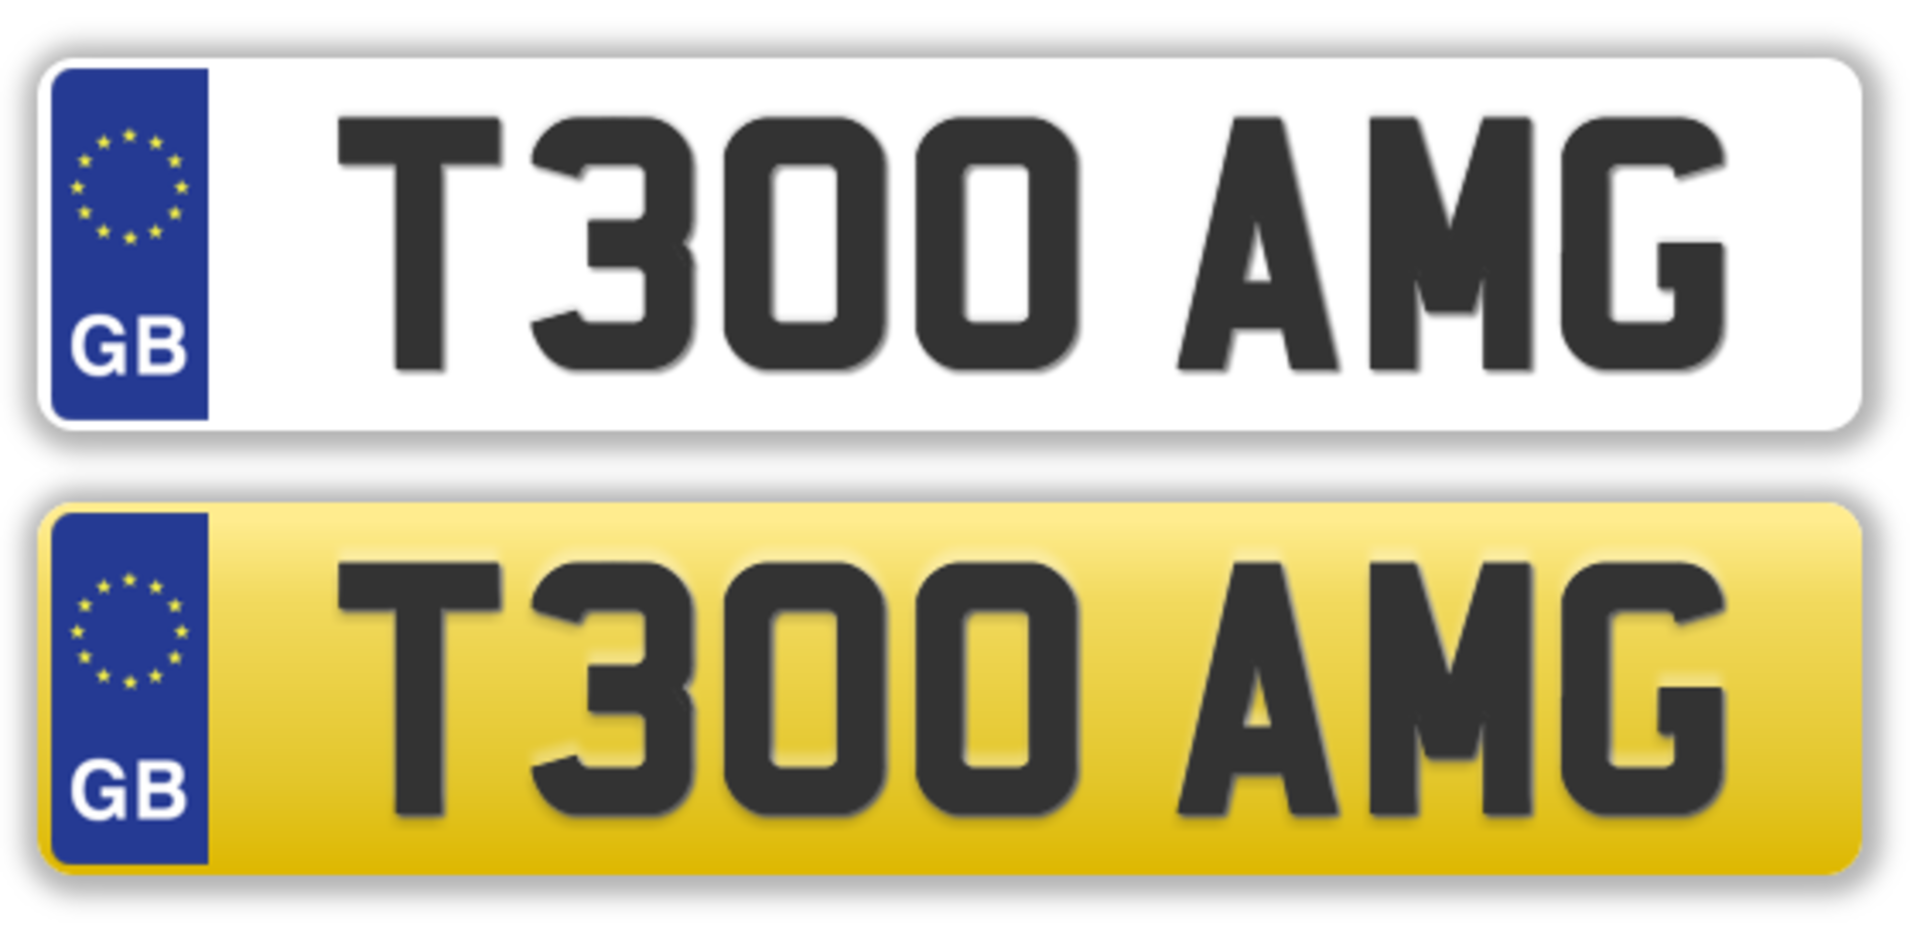 Cherished Plate - T300 AMG - No transfer fees. All registrations on retention and ready to transfer